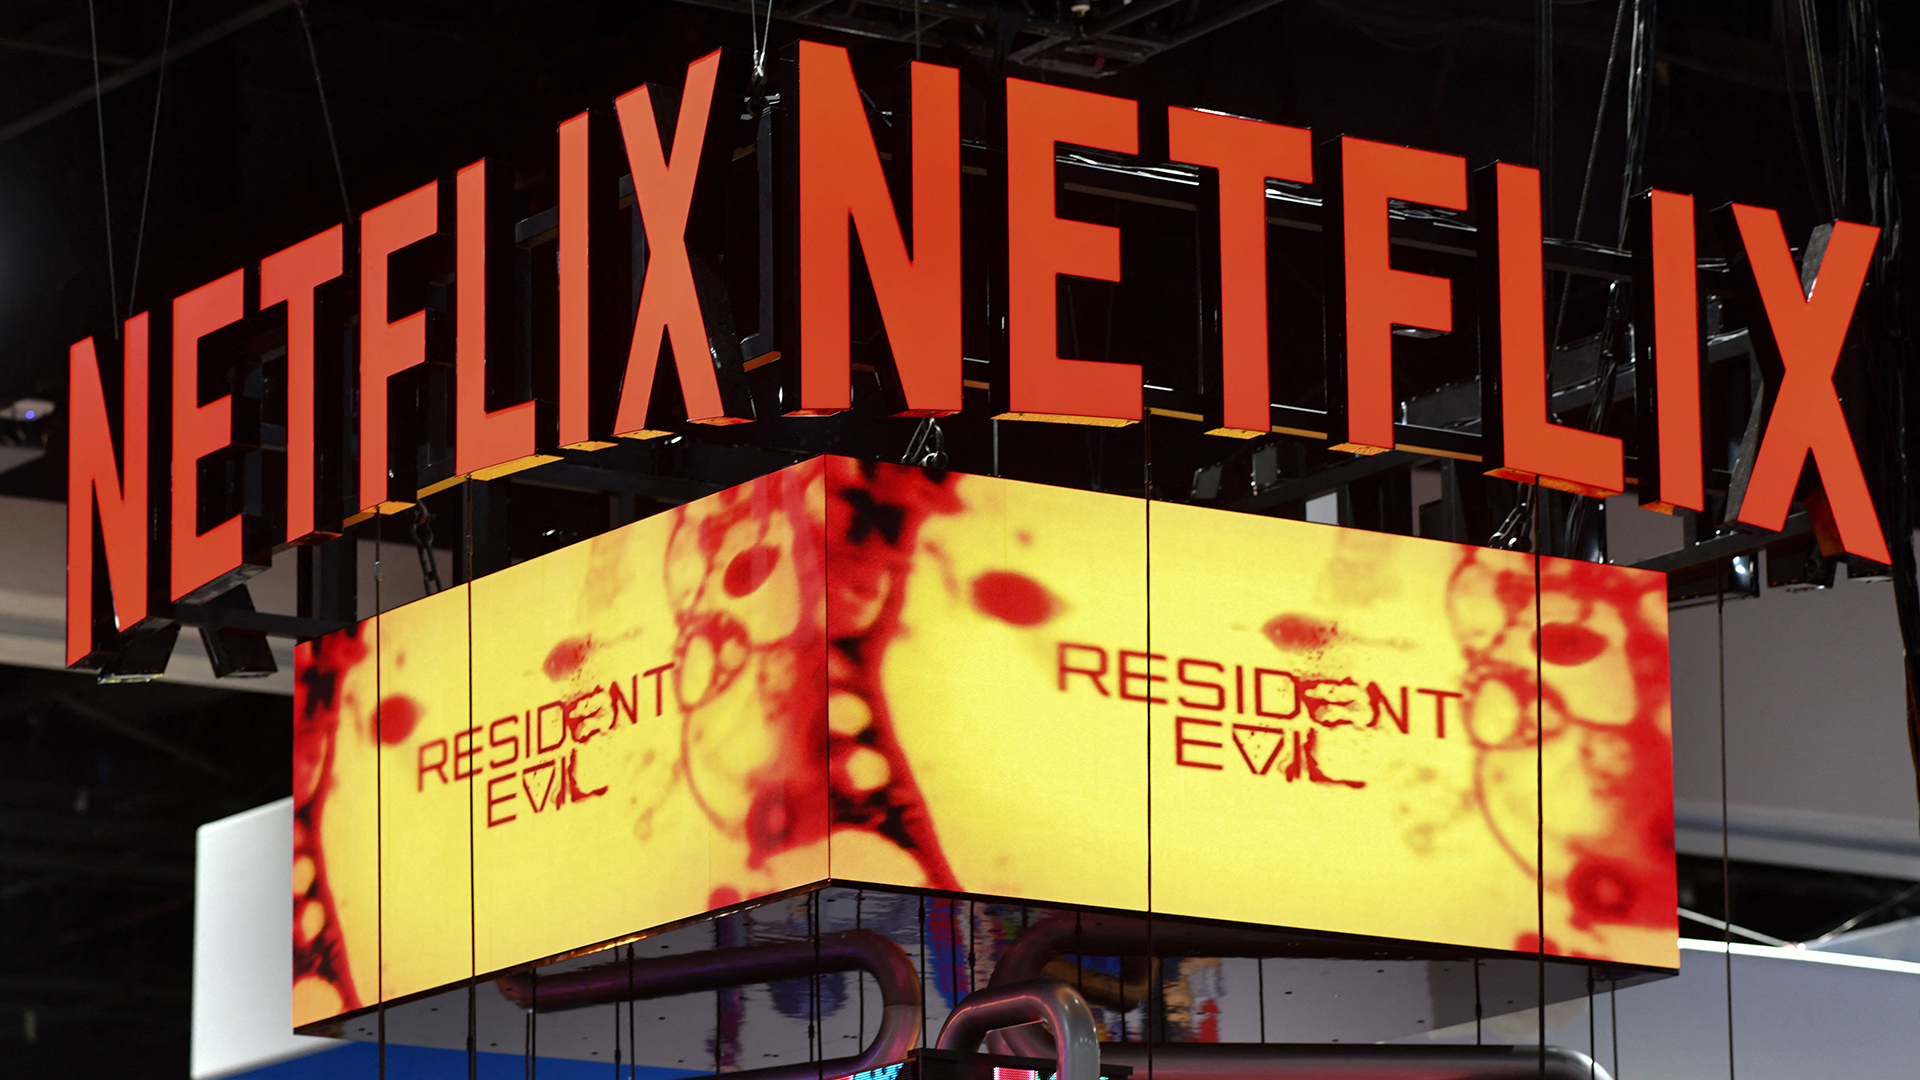 Resident Evil TV series may be coming to Netflix - CNET